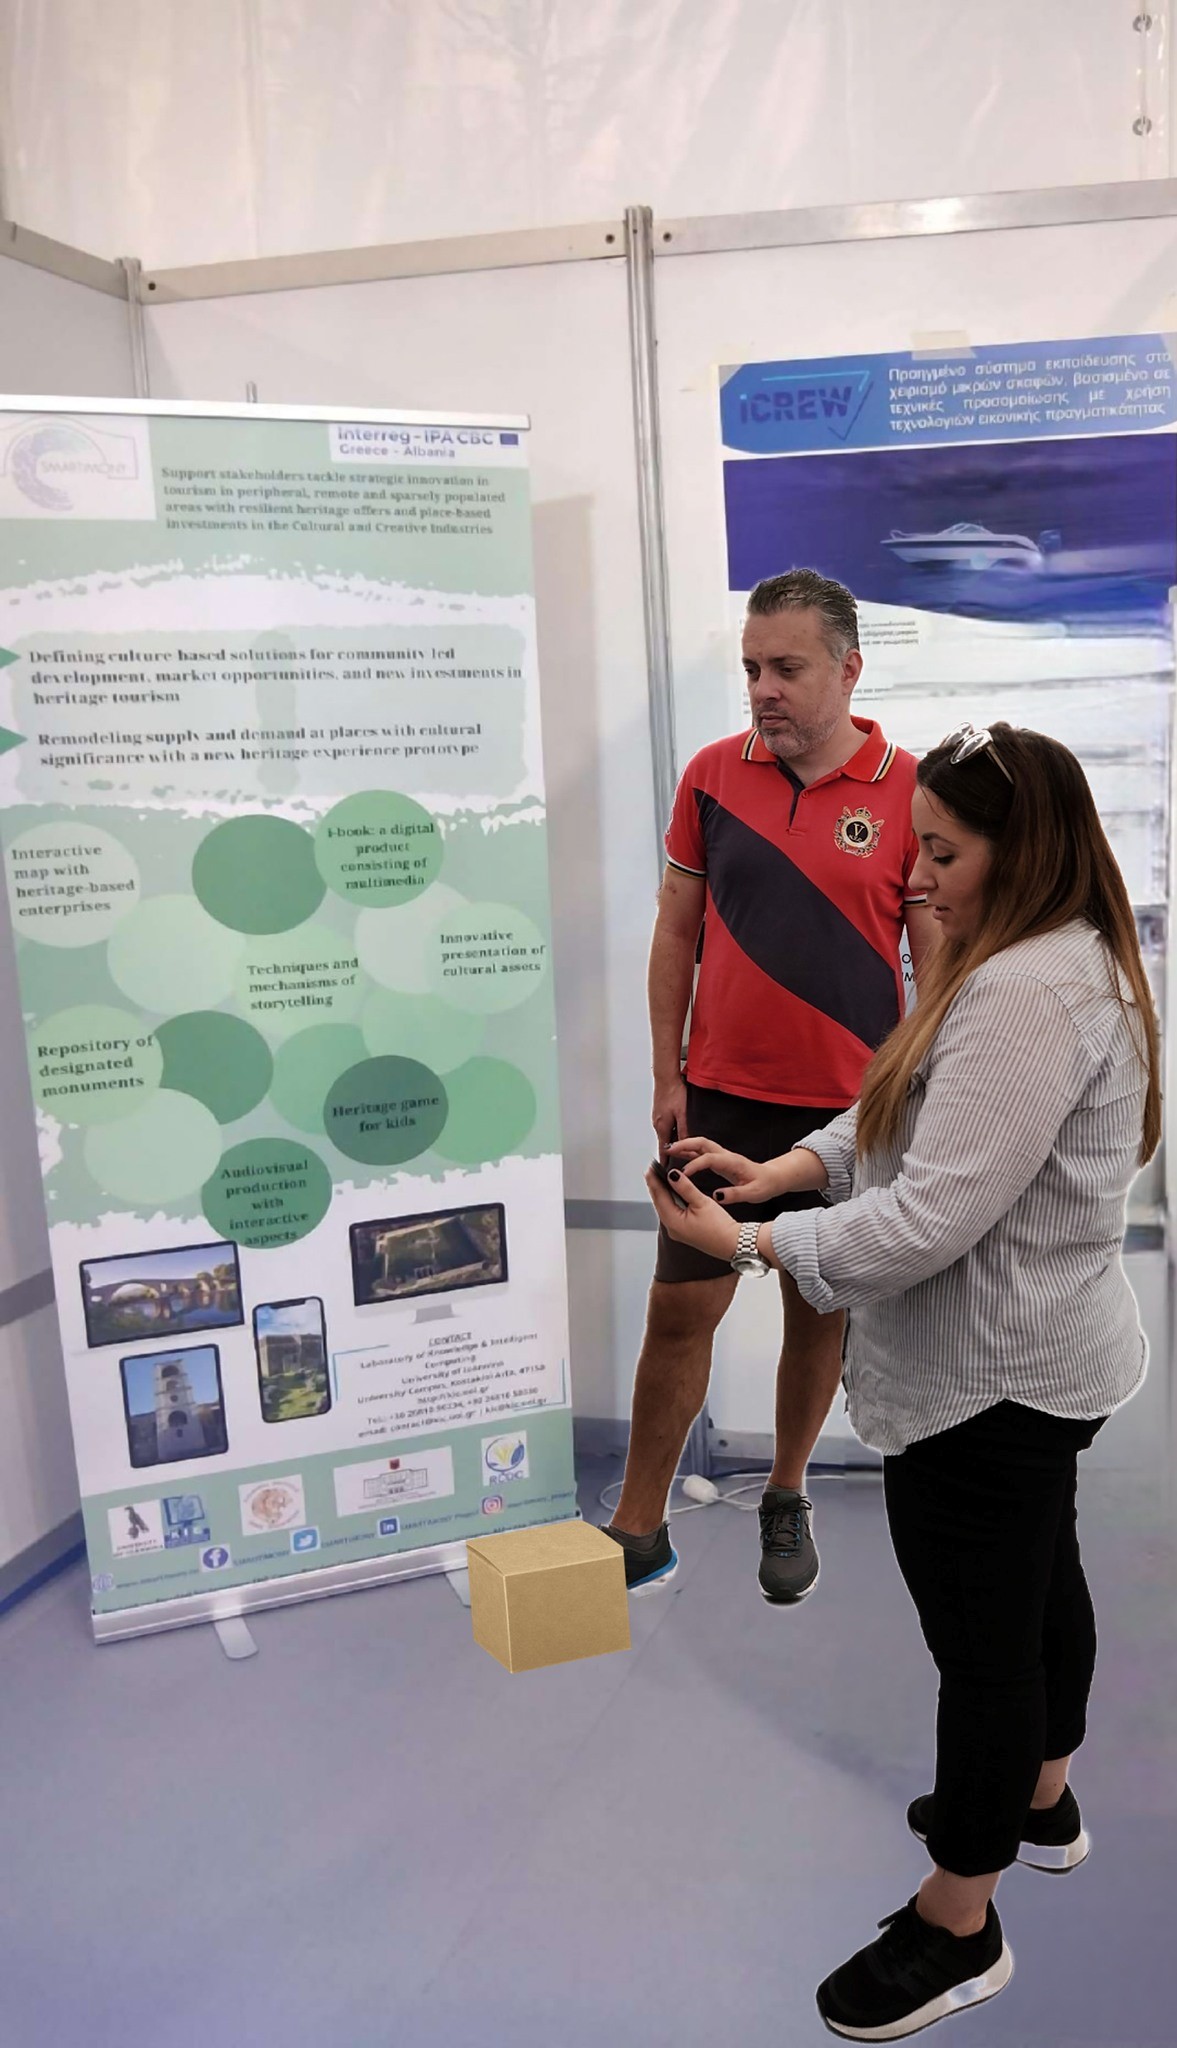 Participation of the SMARTiMONY project in the 9th Panhellenic Exhibition of Arta